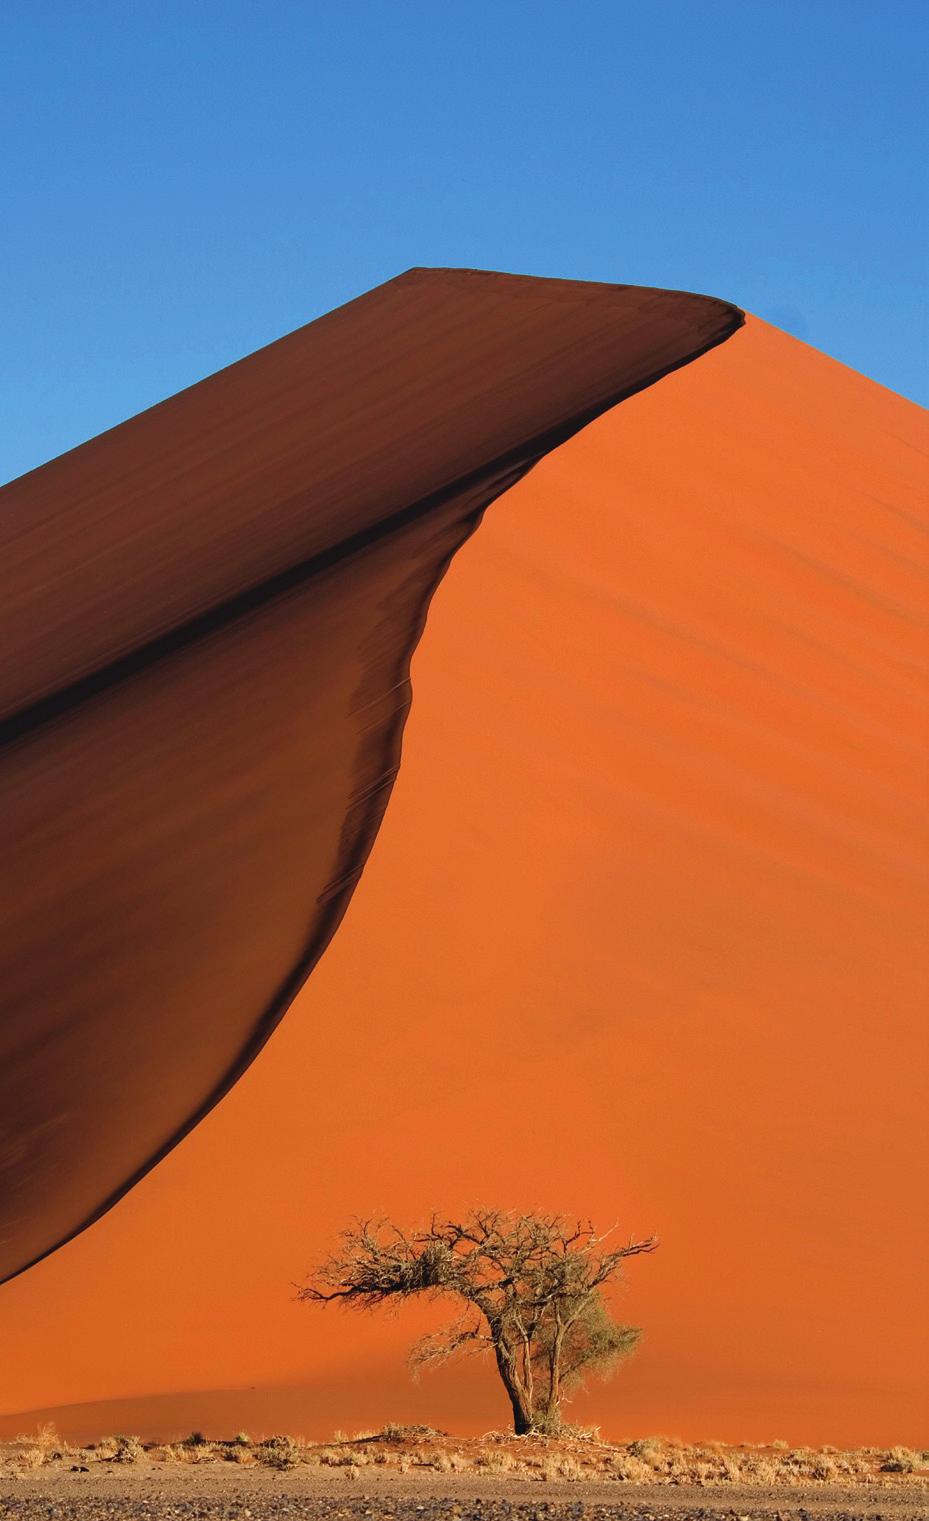 Tour membership limited to 24 UW alumni and friends Day 9: Windhoek/Namib Desert/Sossusvlei After a brief tour of Namibia s largest city, we set out through the central Namib Desert of vast gravel